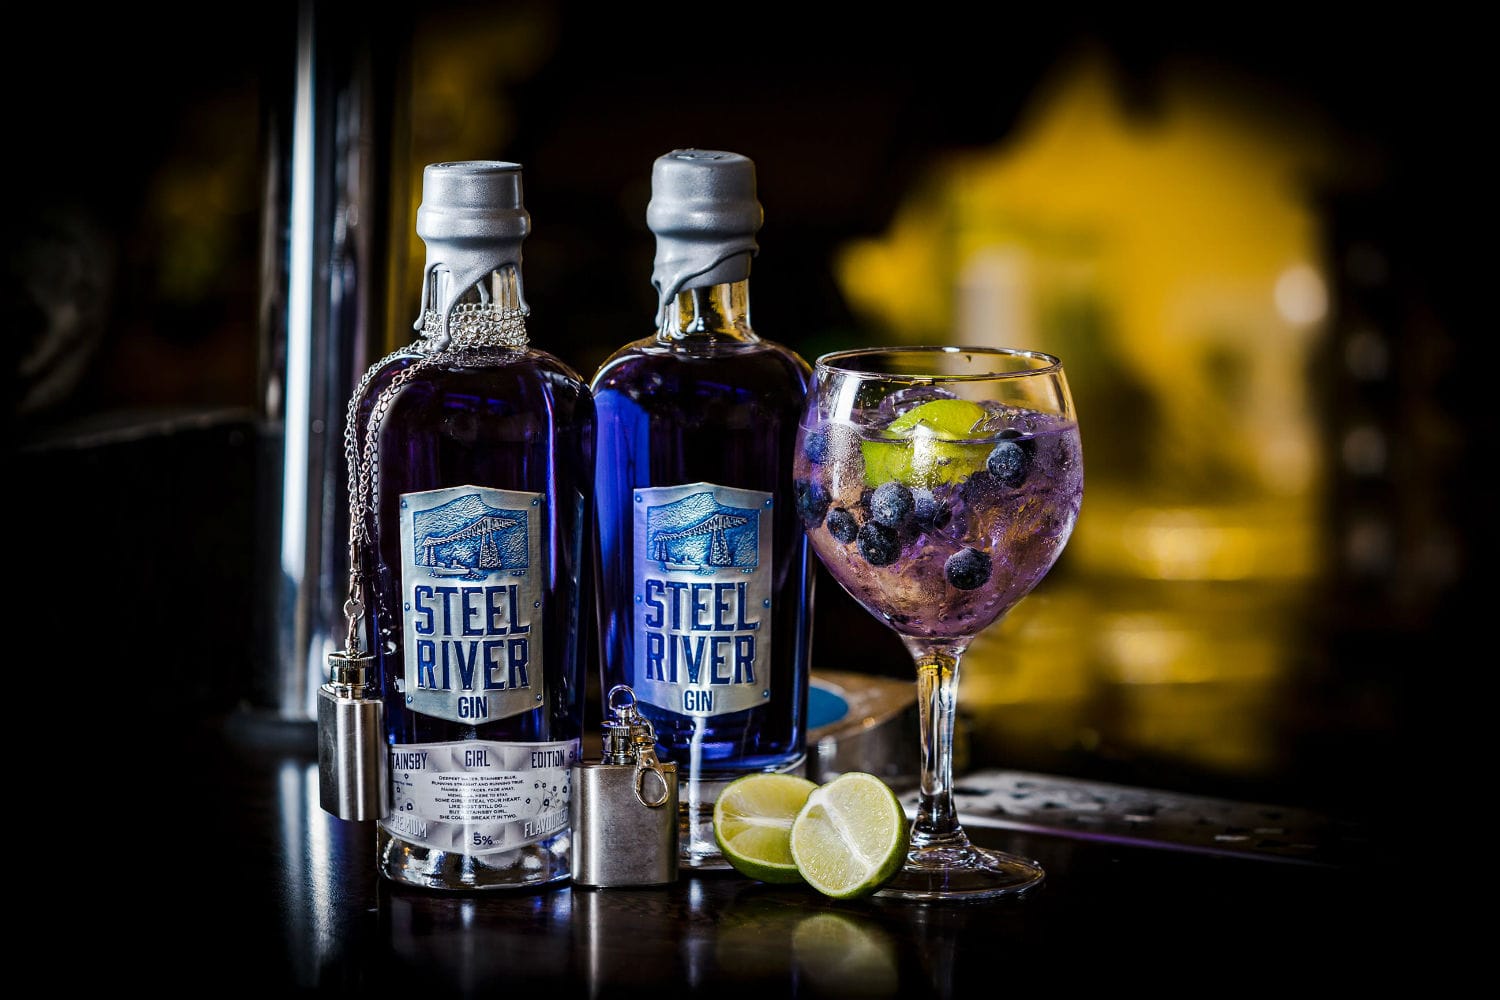 Steel river gin label